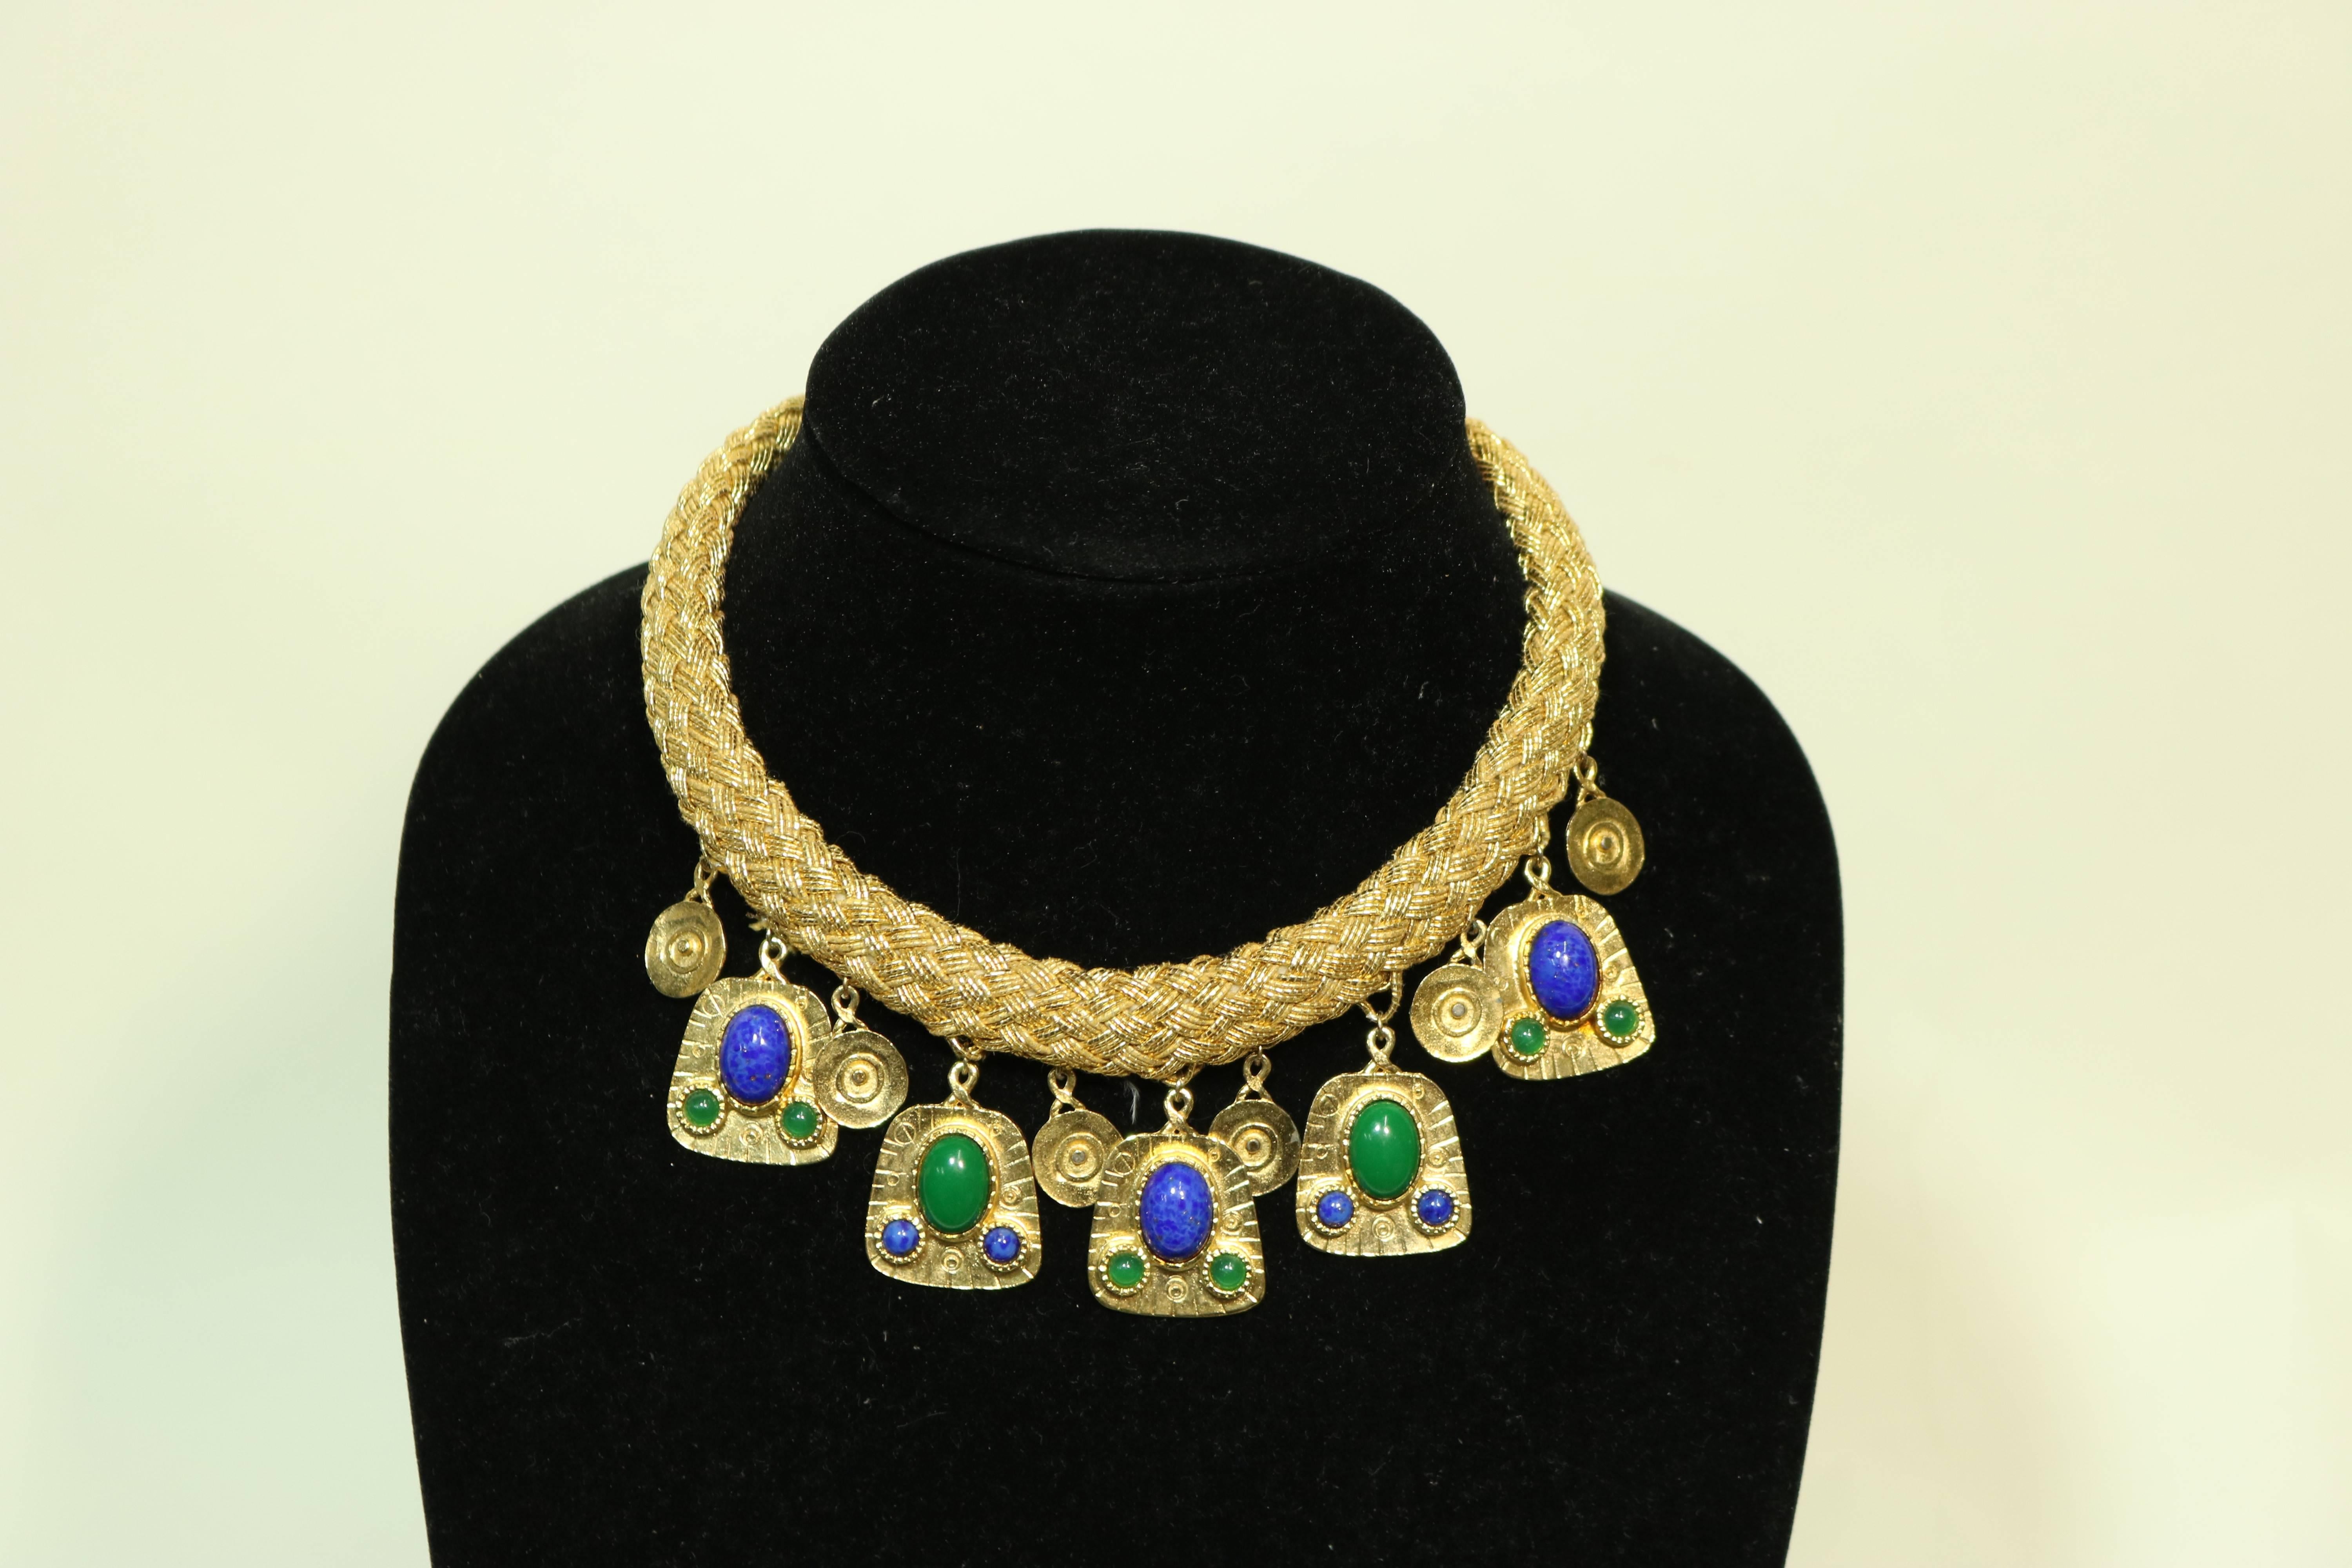 Hollywood Regency Gold Woven Strand Collar Necklace with Malachite and Lapis Drops For Sale